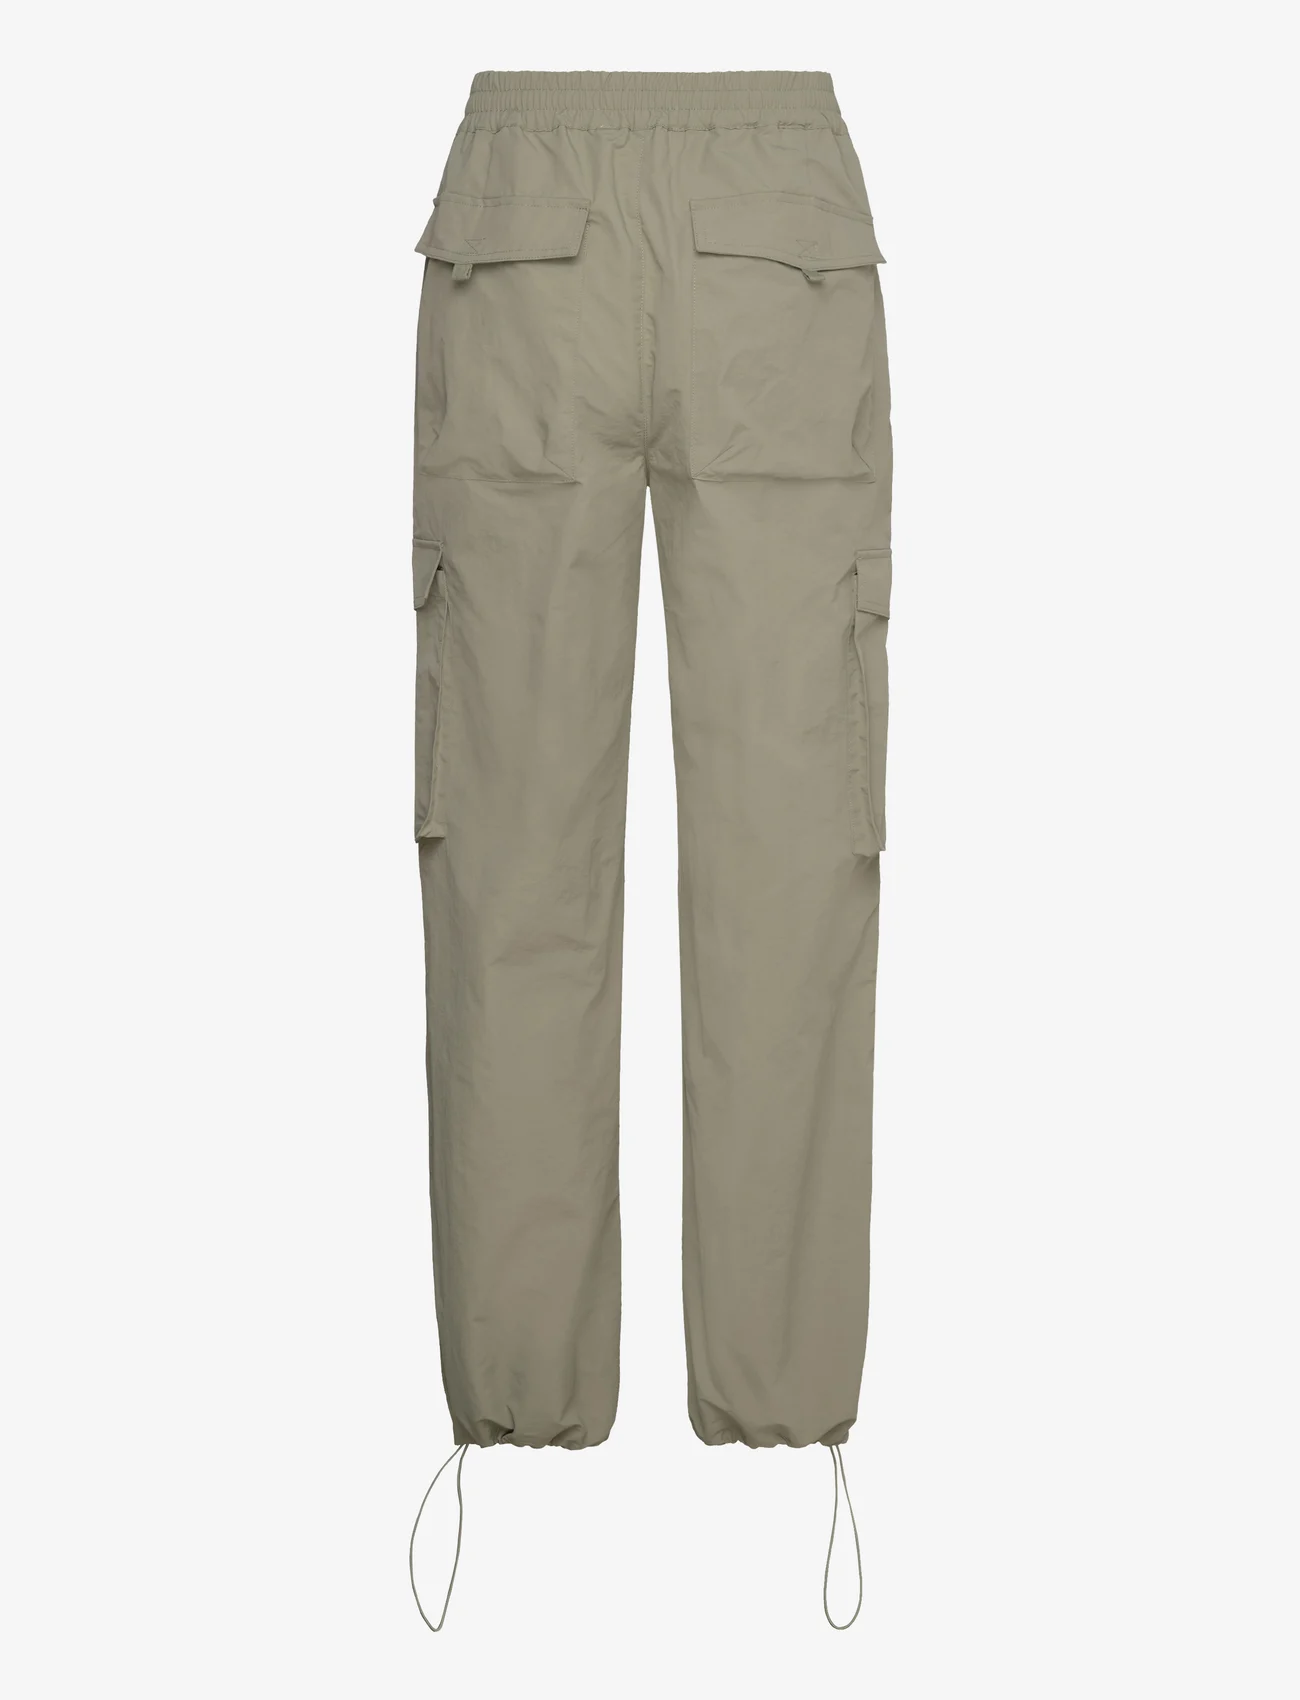 Sofie Schnoor - Trousers - cargo pants - light army - 1